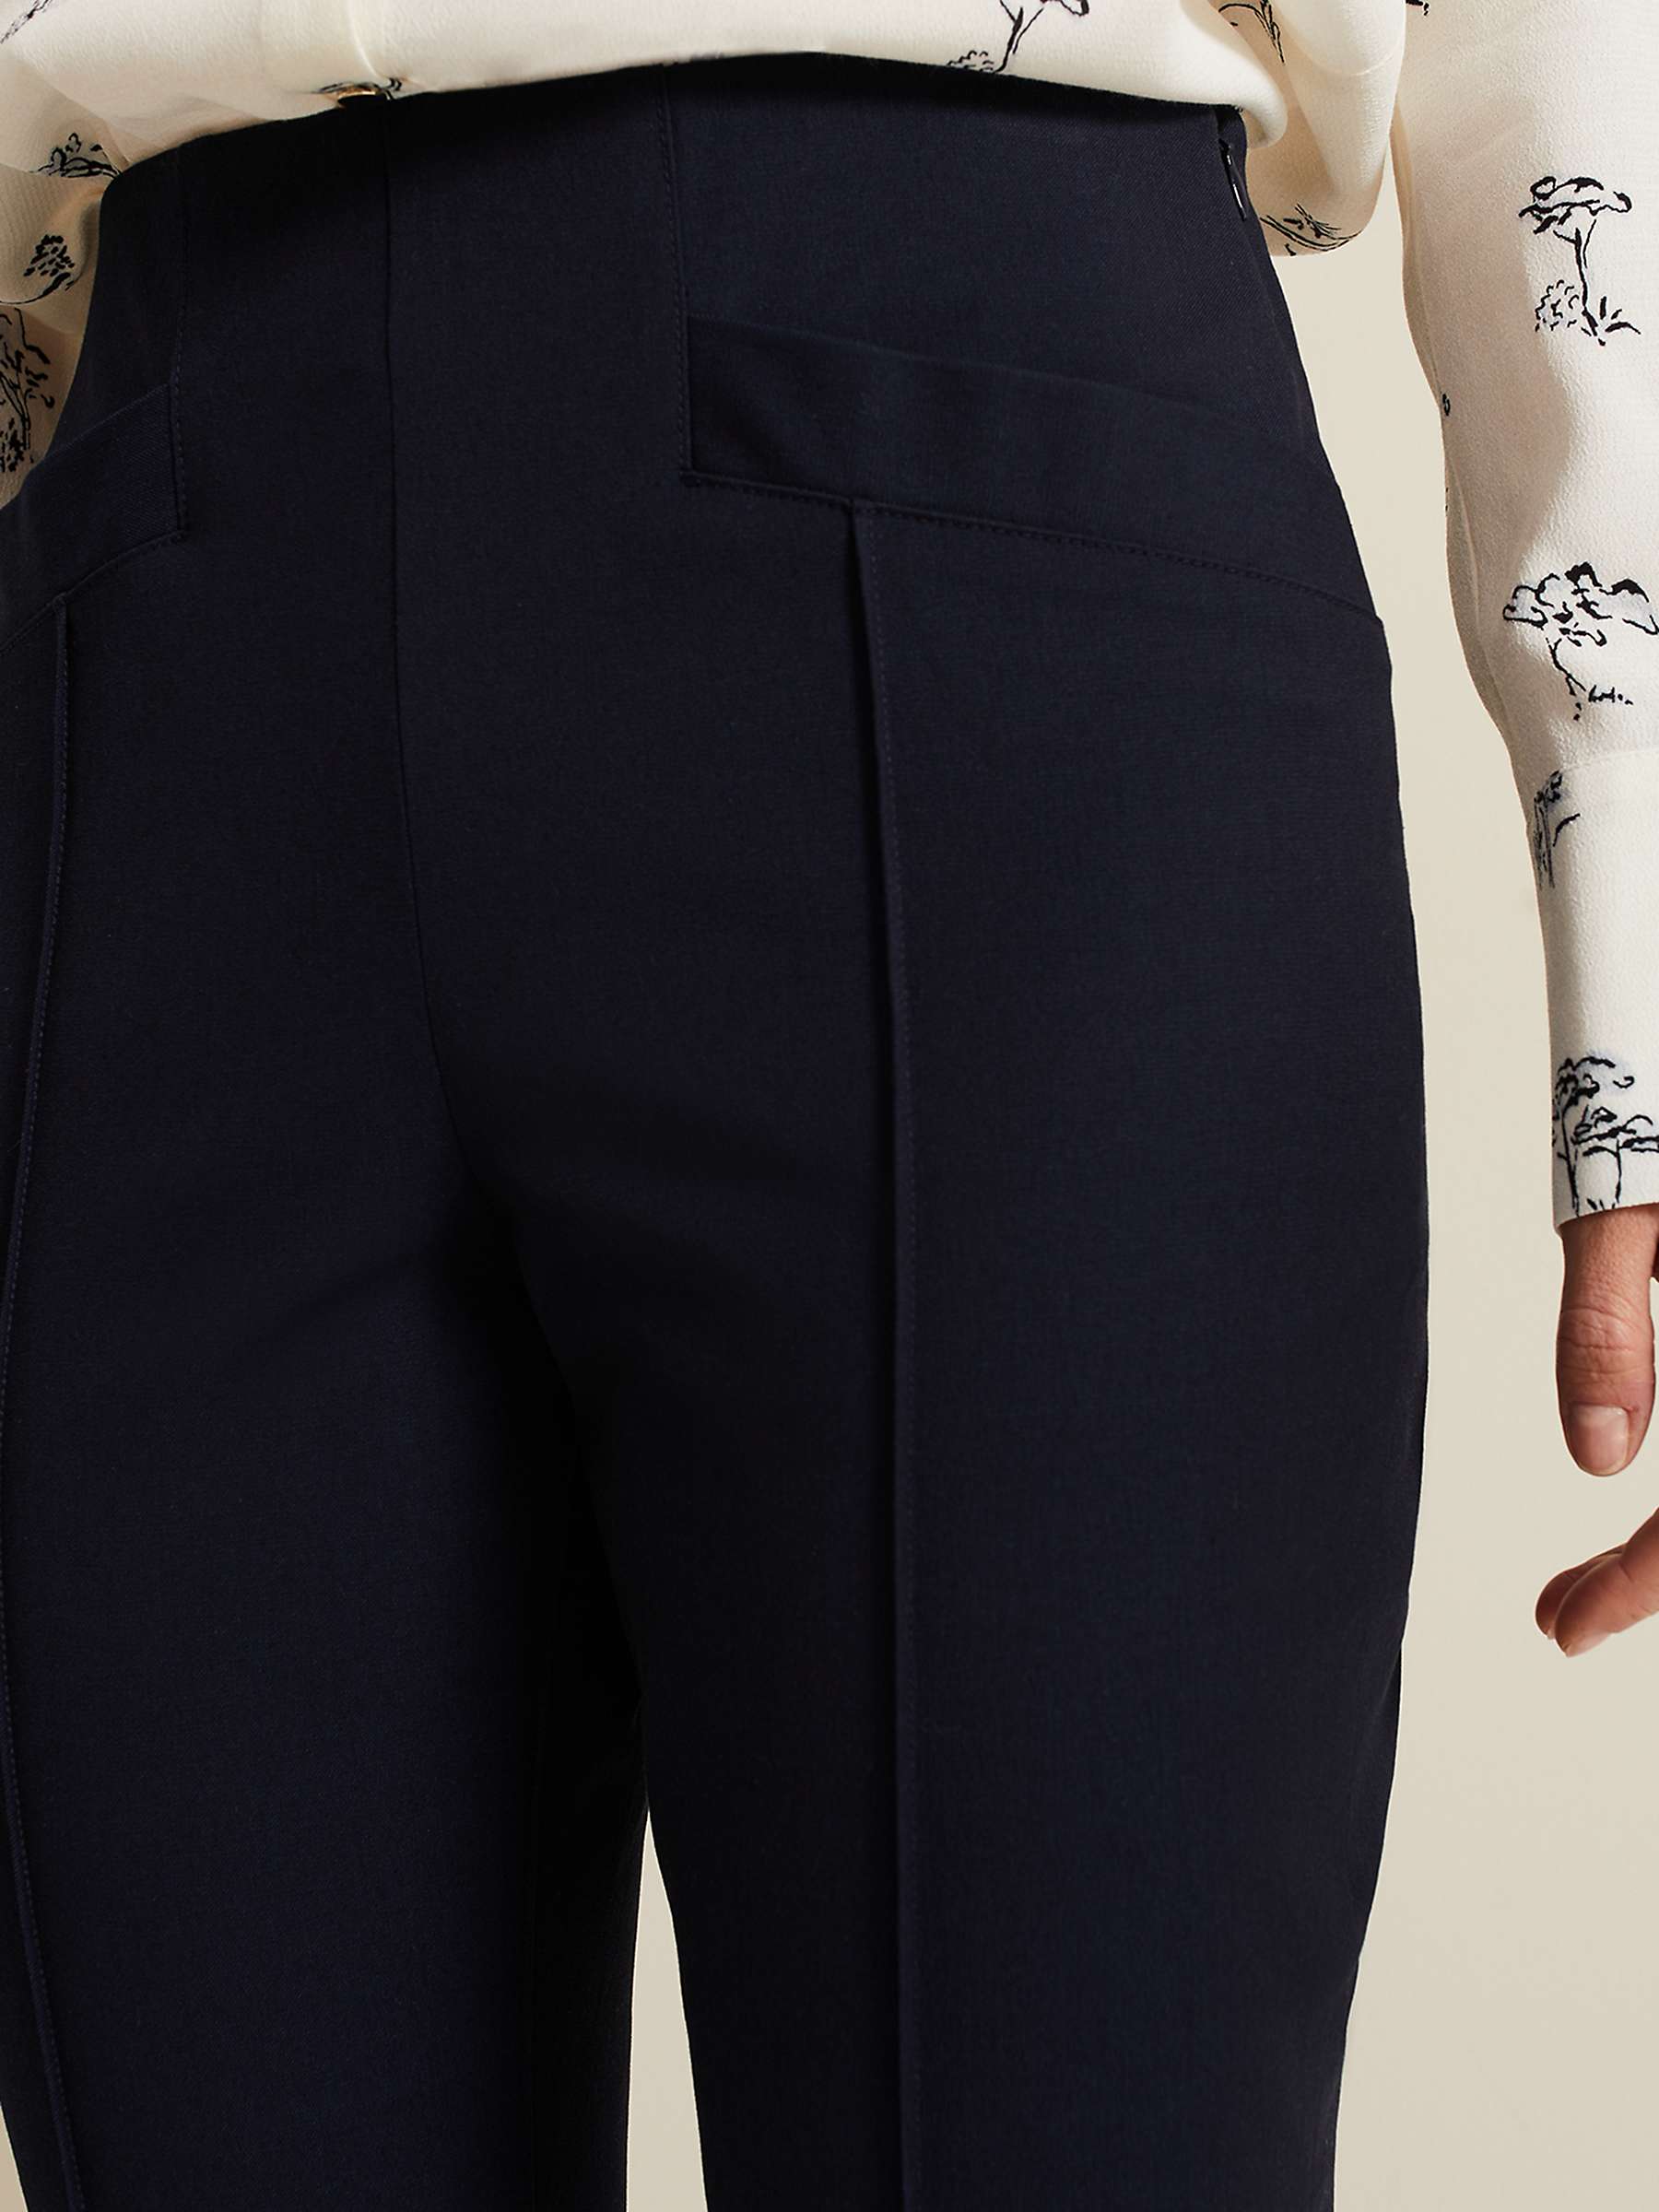 Buy Phase Eight Miah Stretch Capri Trousers Online at johnlewis.com